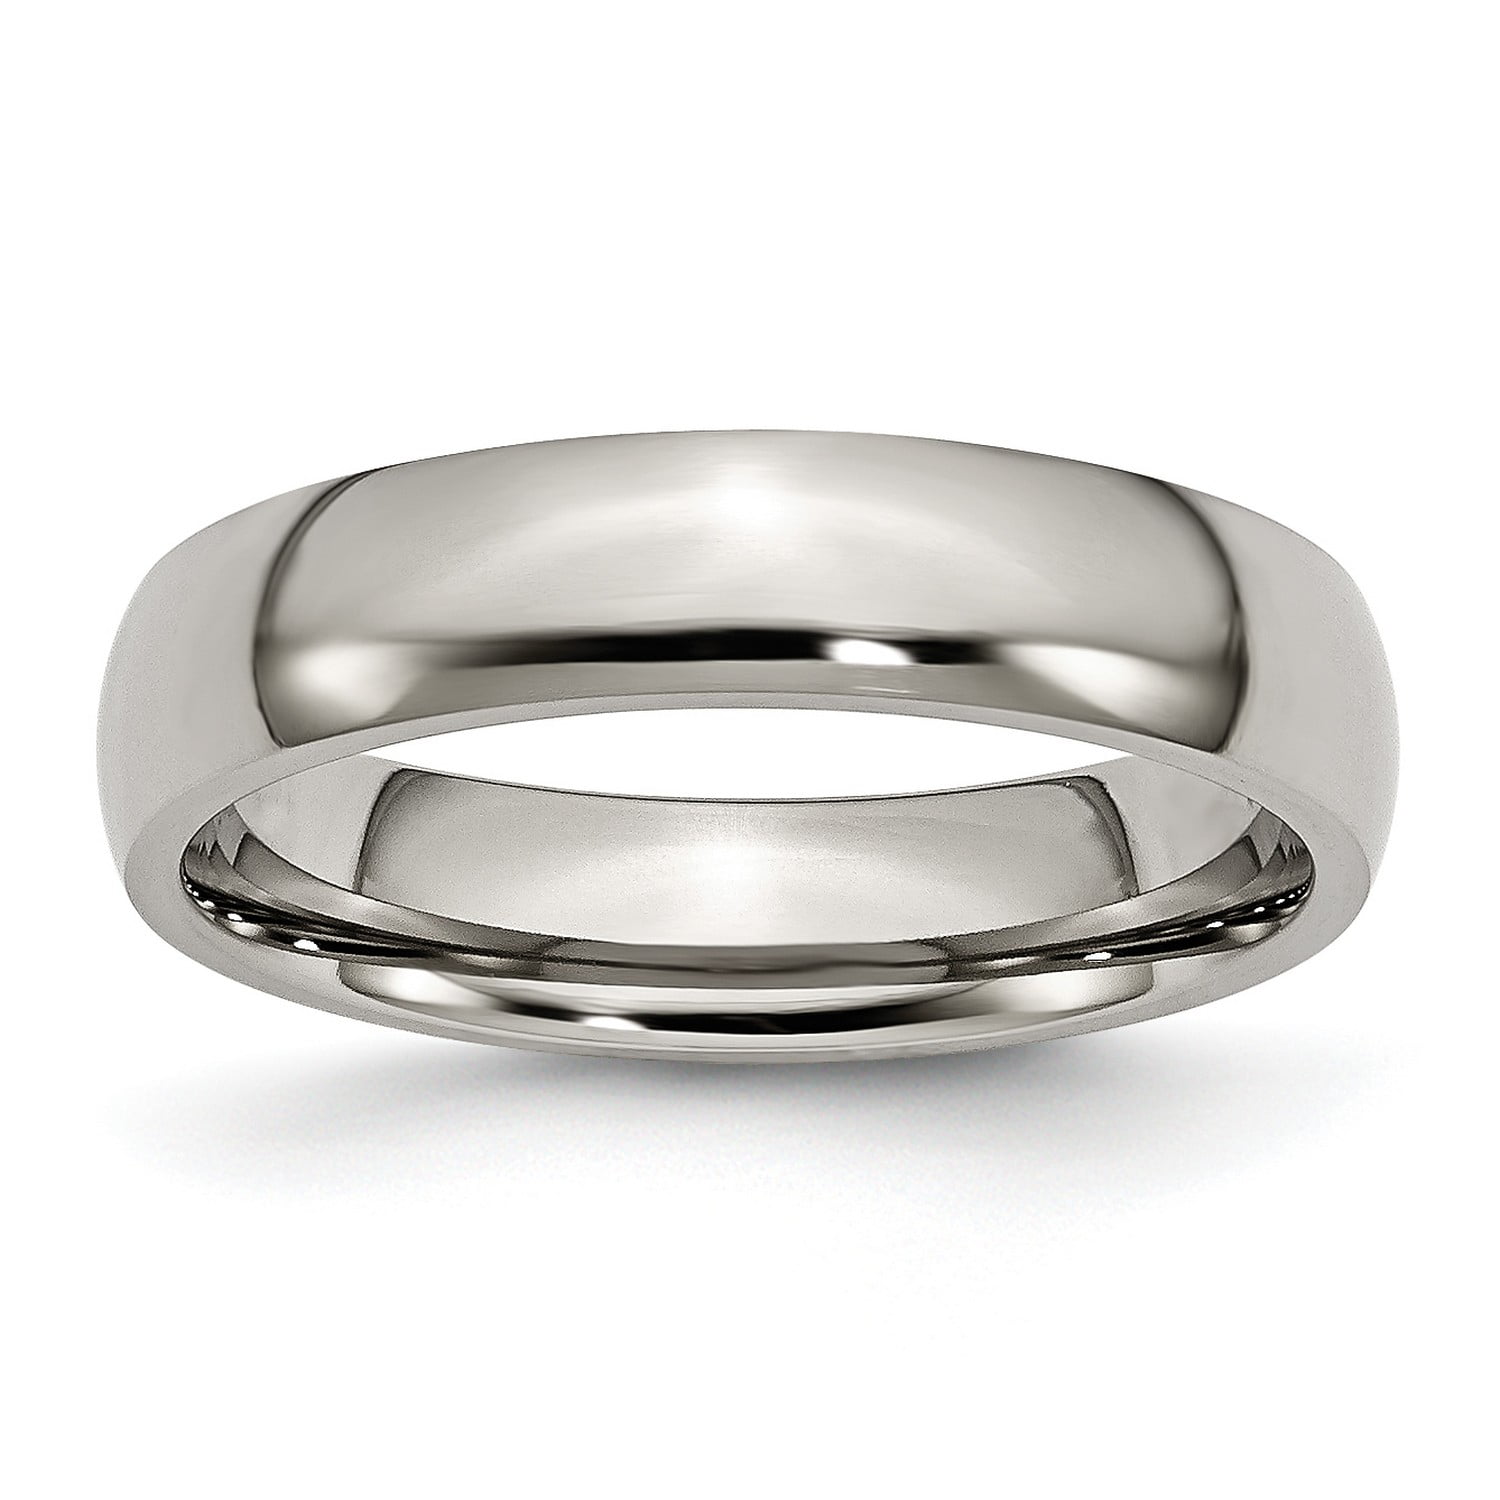 Classic Titanium Ring Comfort Fit Polished 6mm Wide Wedding Band Size 4 to 14 